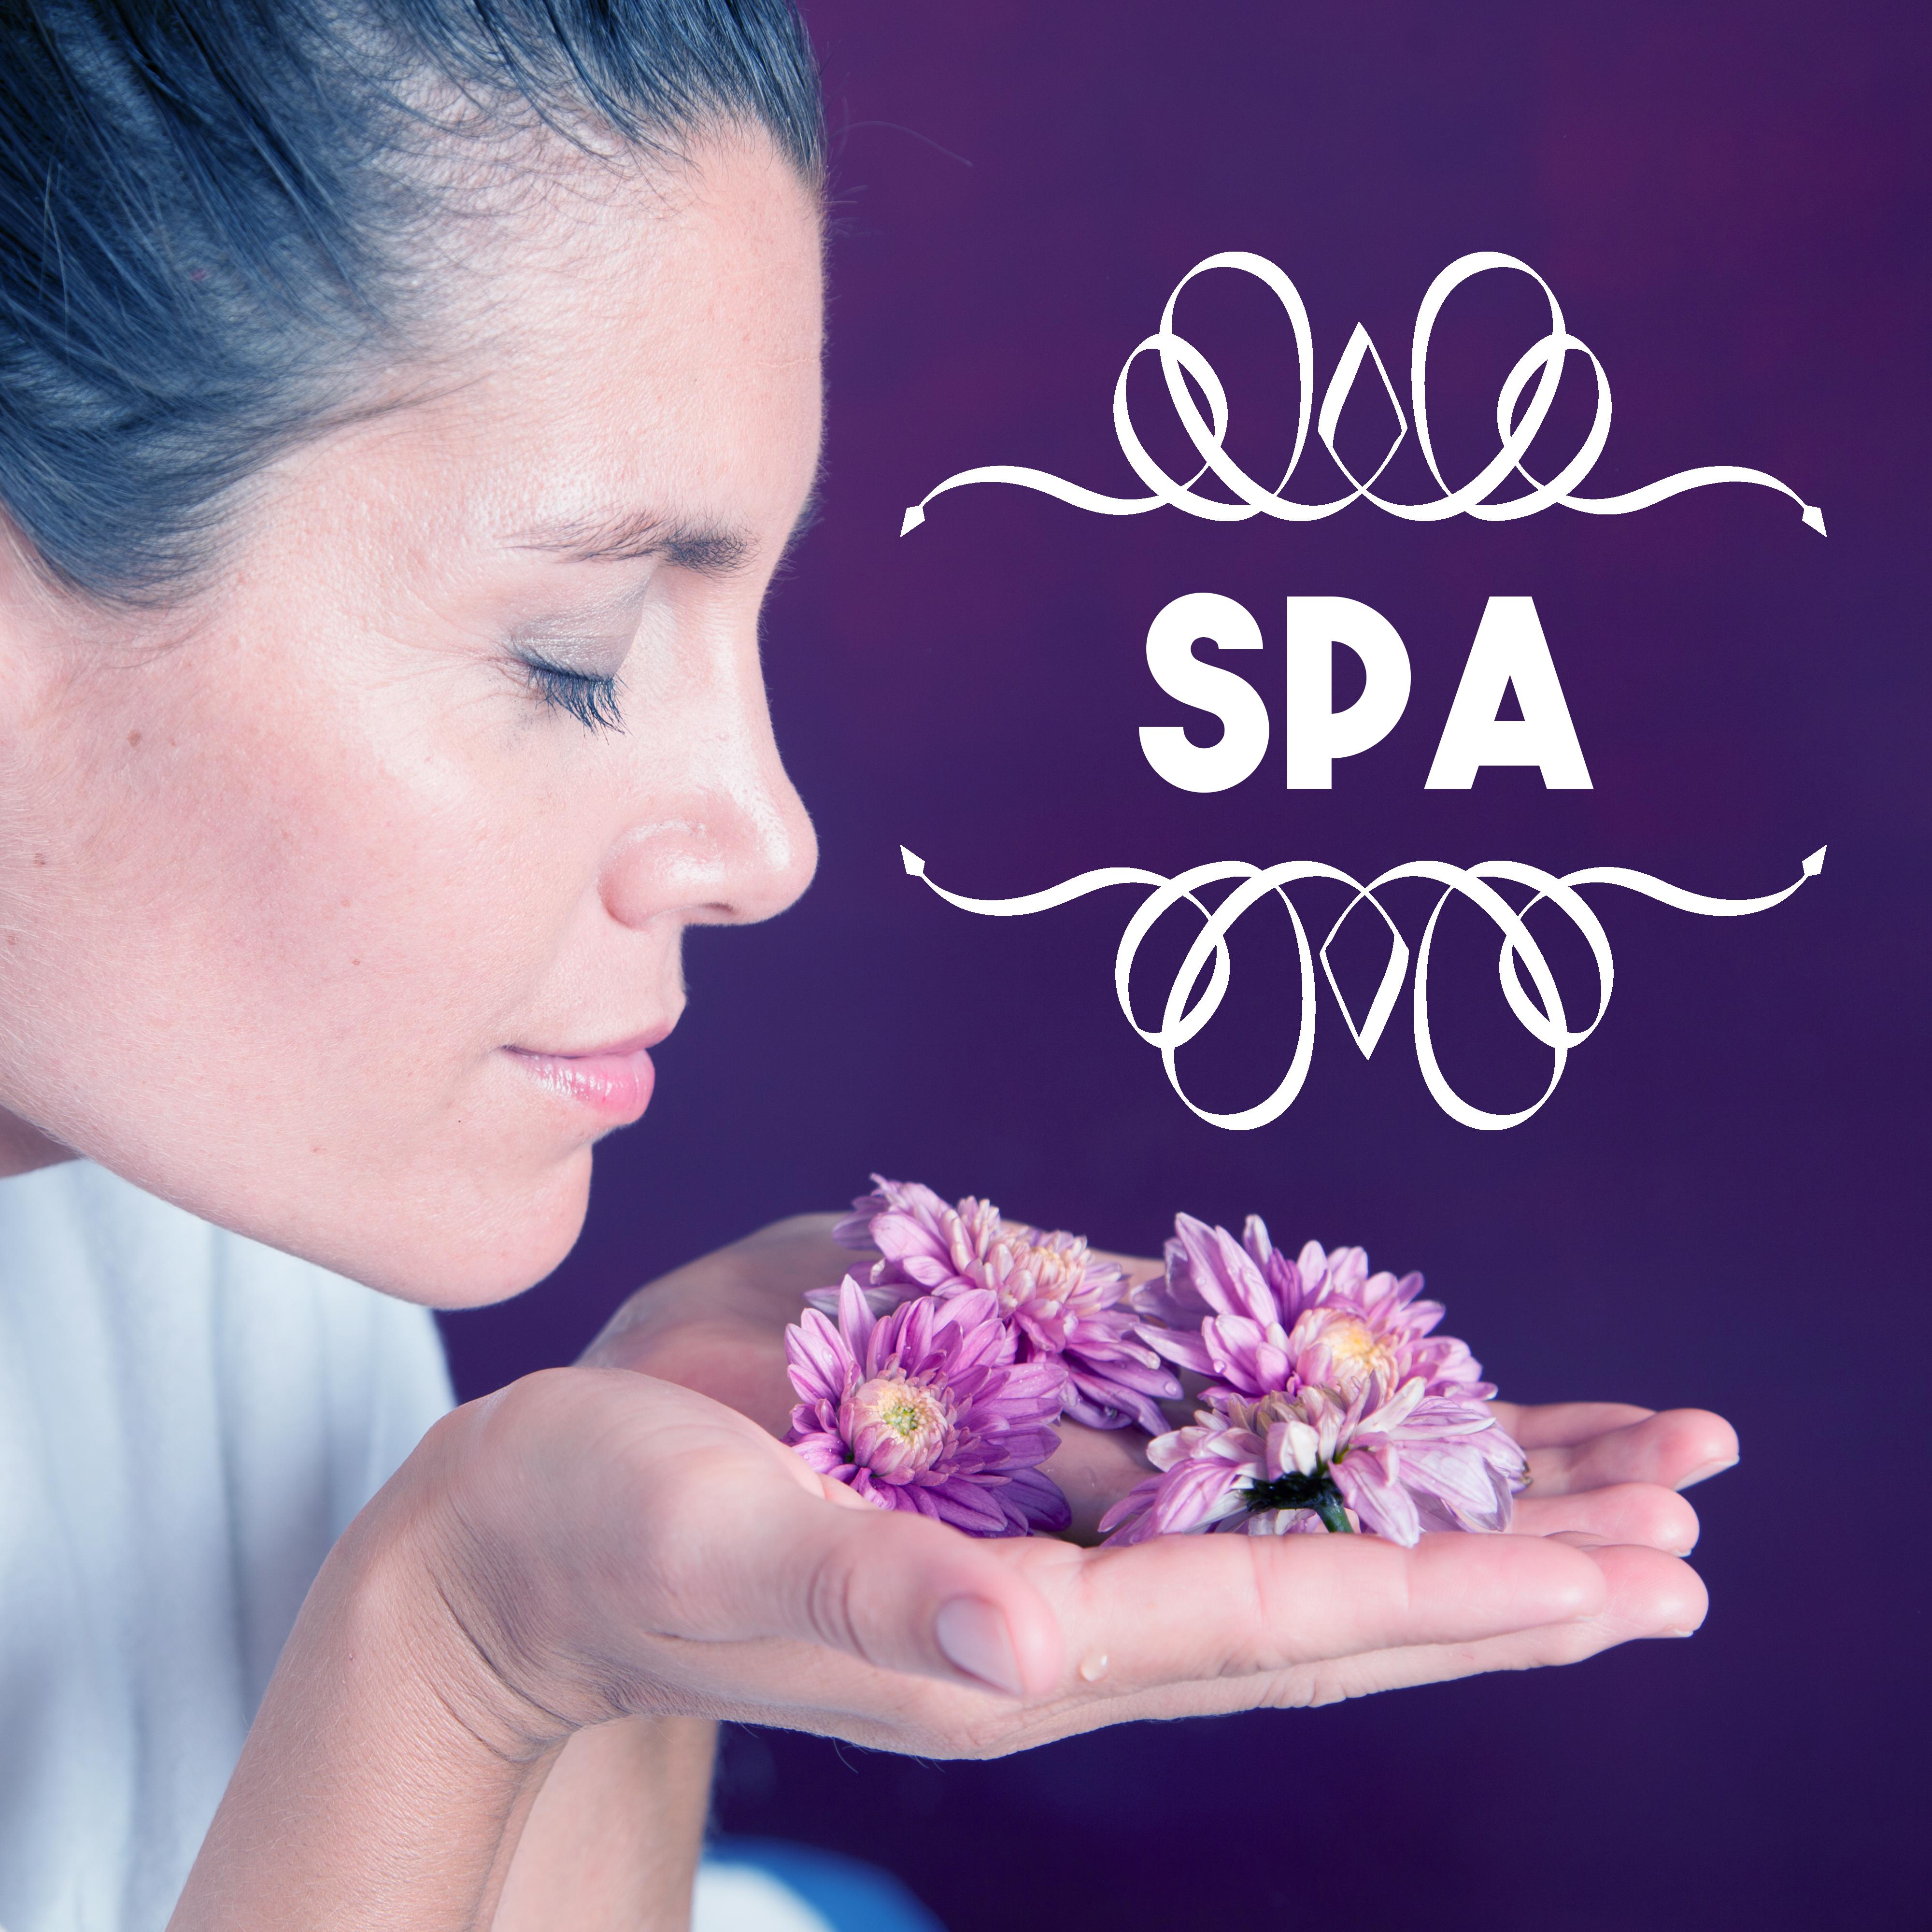 Spa – Relaxing Therapy for Wellness, Relief, Deep Massage, Nature Sounds for Relaxation, Stress Free, Calm Down, Spa Dreams